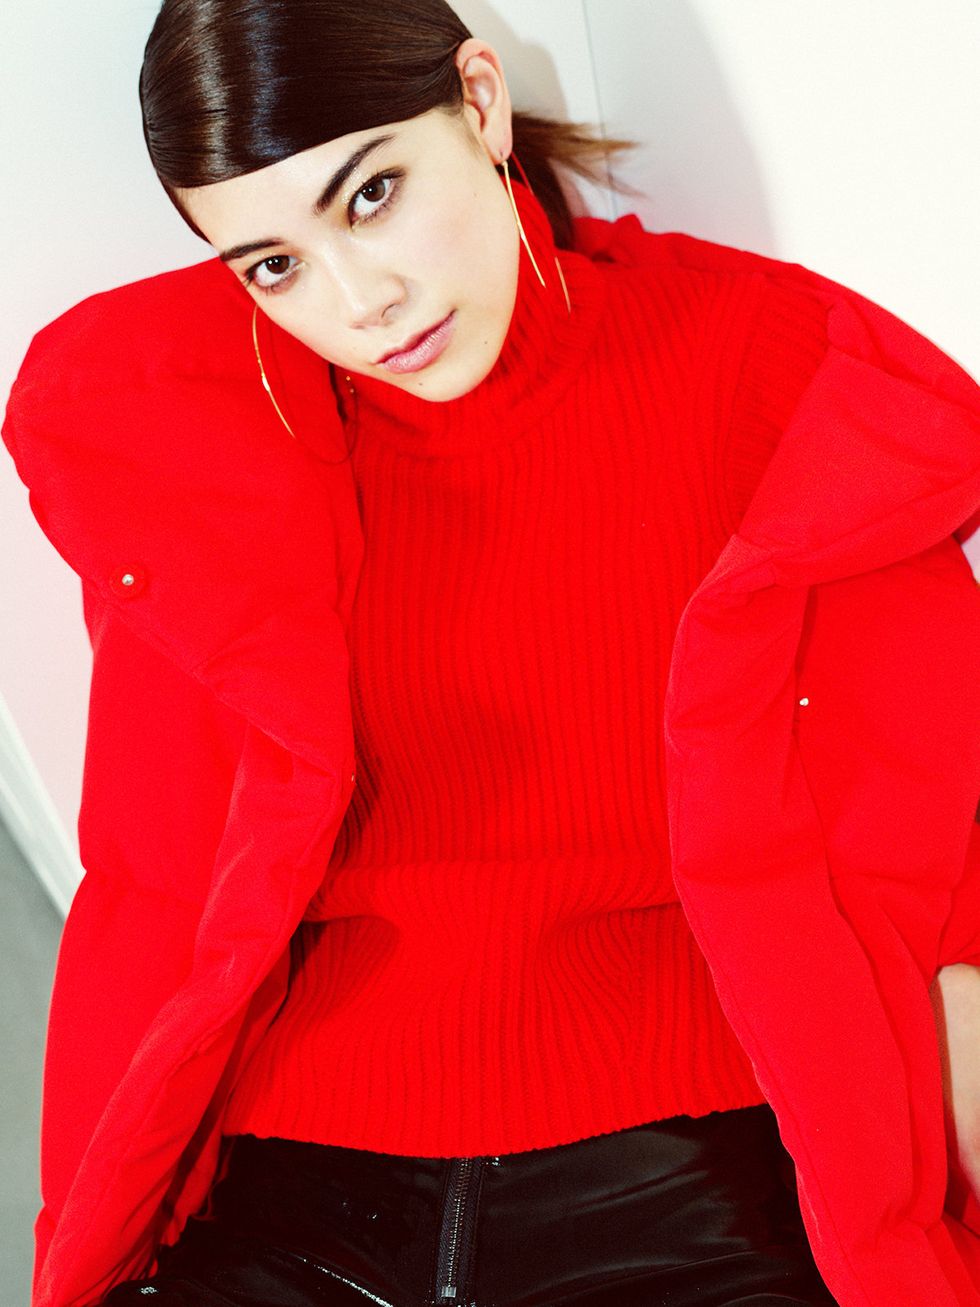 Clothing, Red, Outerwear, Beauty, Jacket, Lip, Sleeve, Neck, Shoulder, Fashion, 